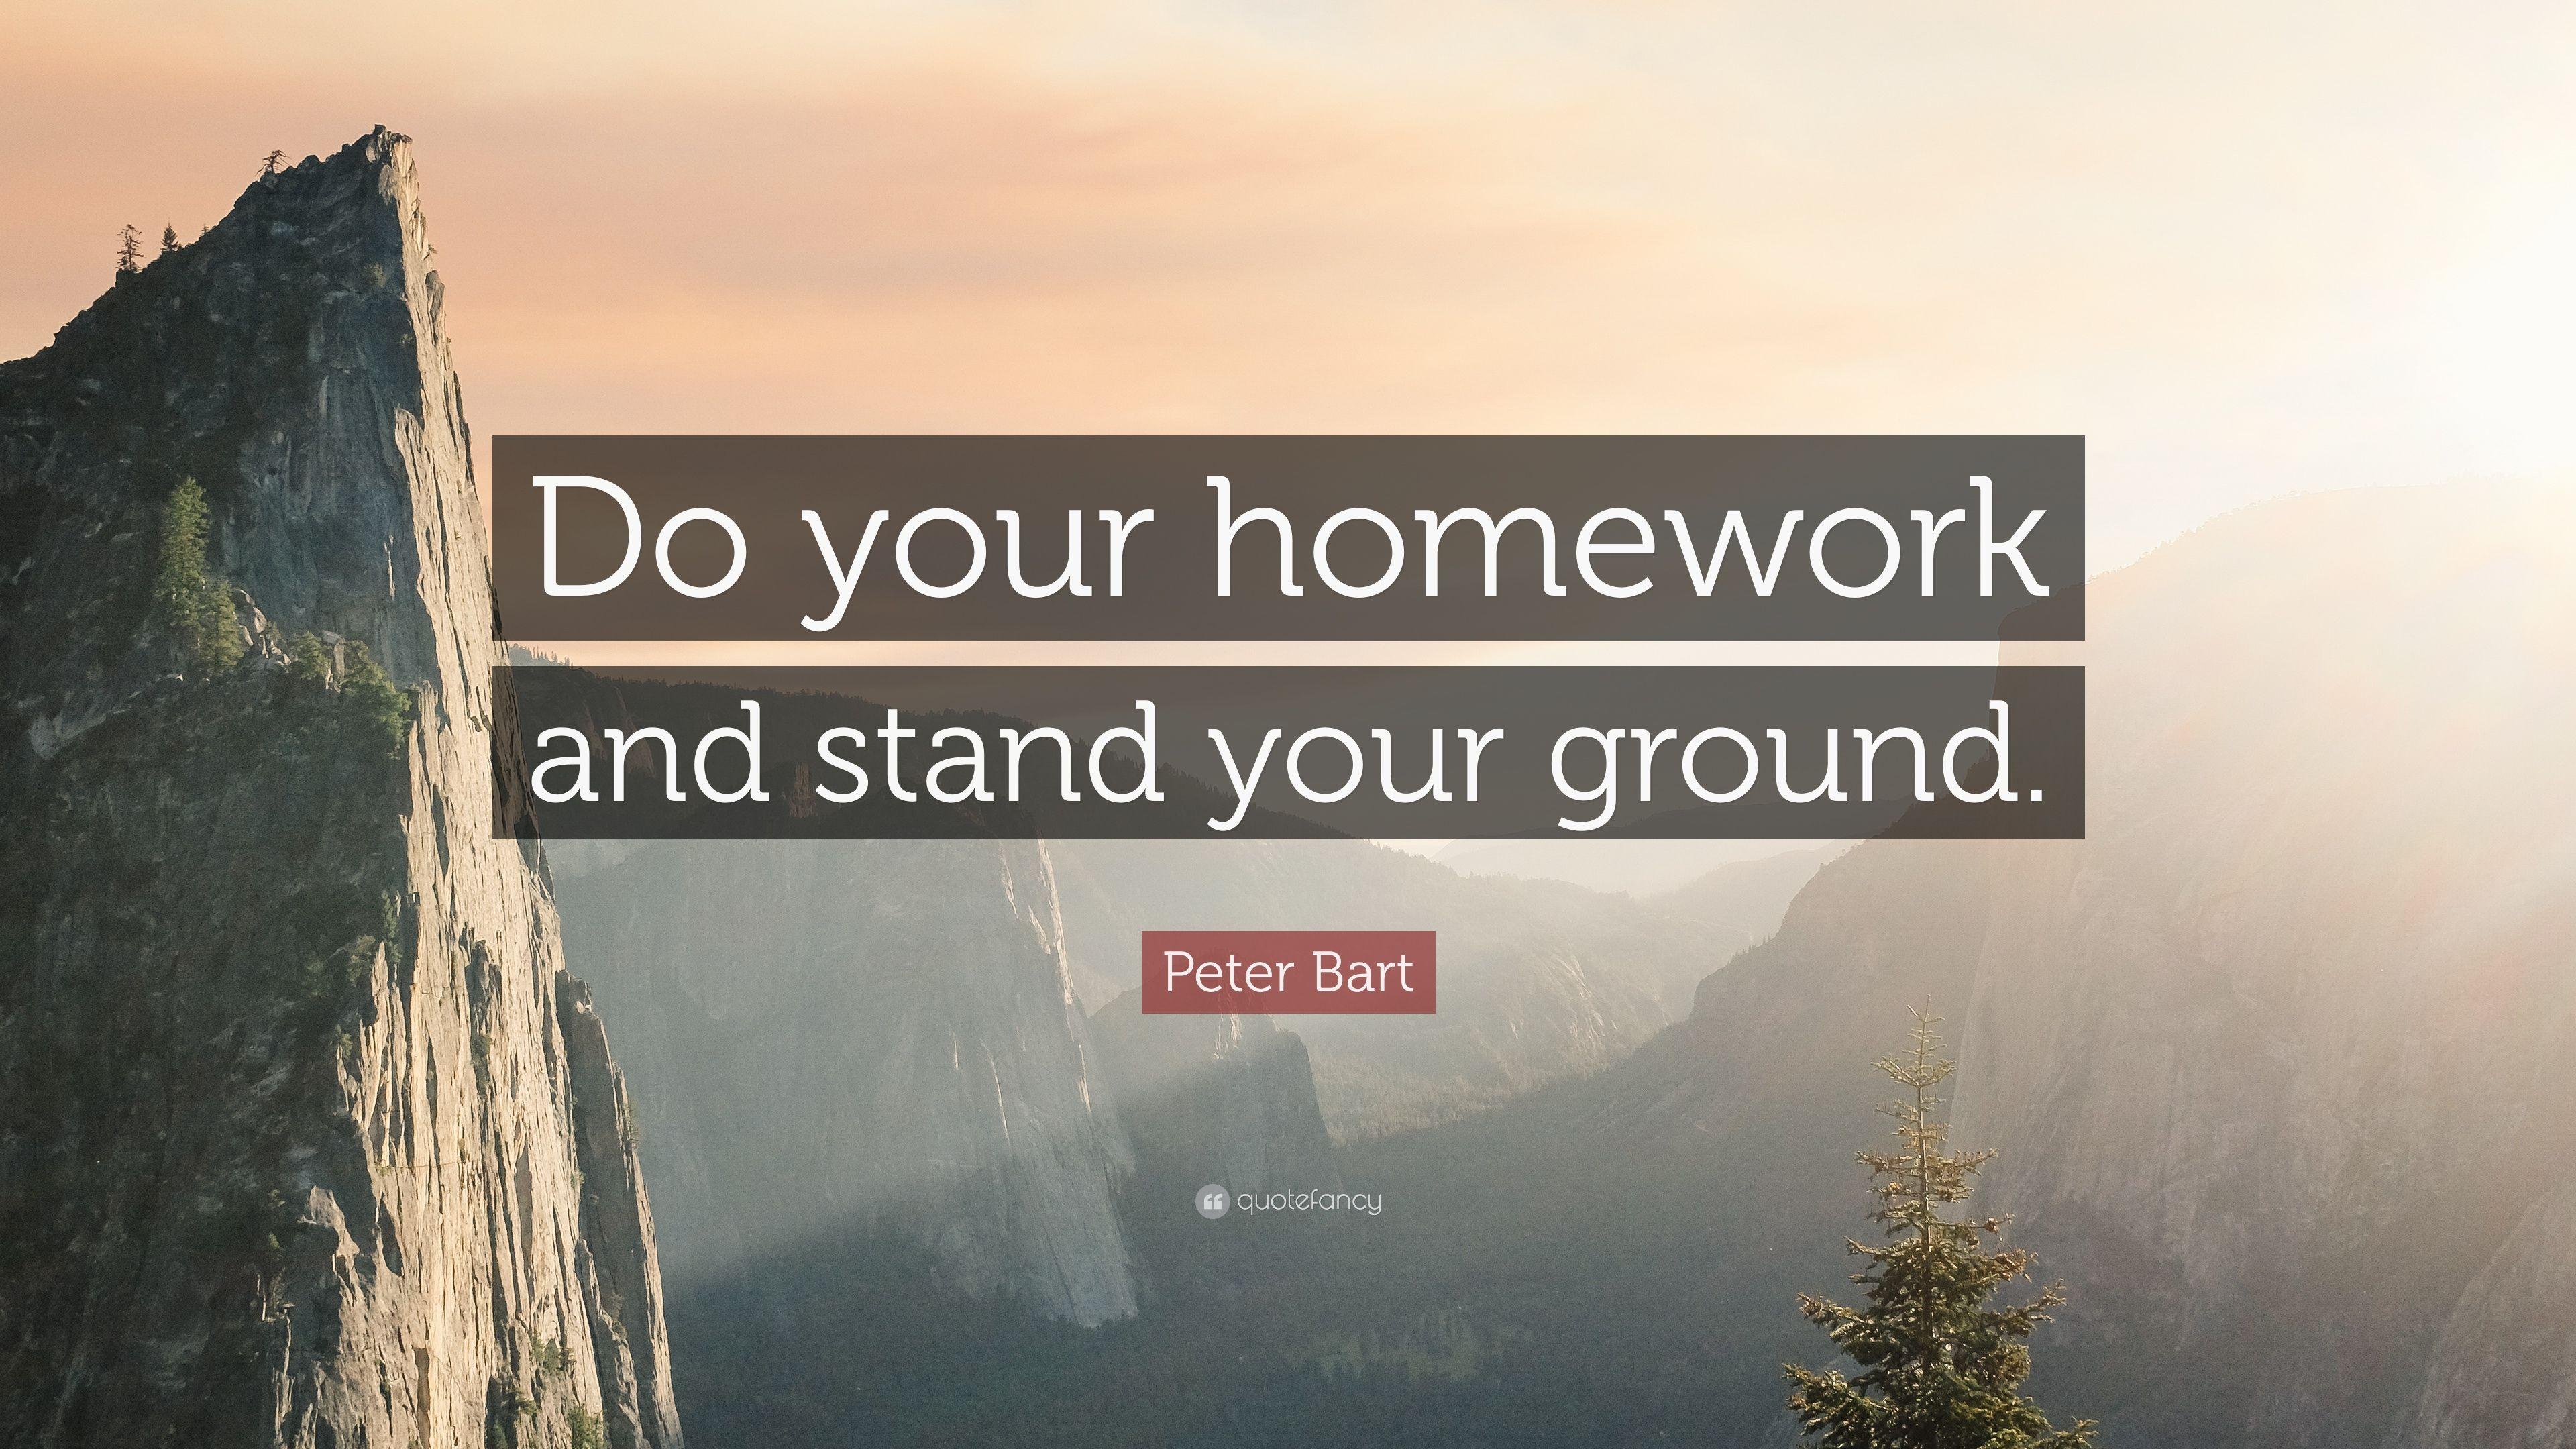 Peter Bart Quote: “Do your homework and stand your ground.” 10